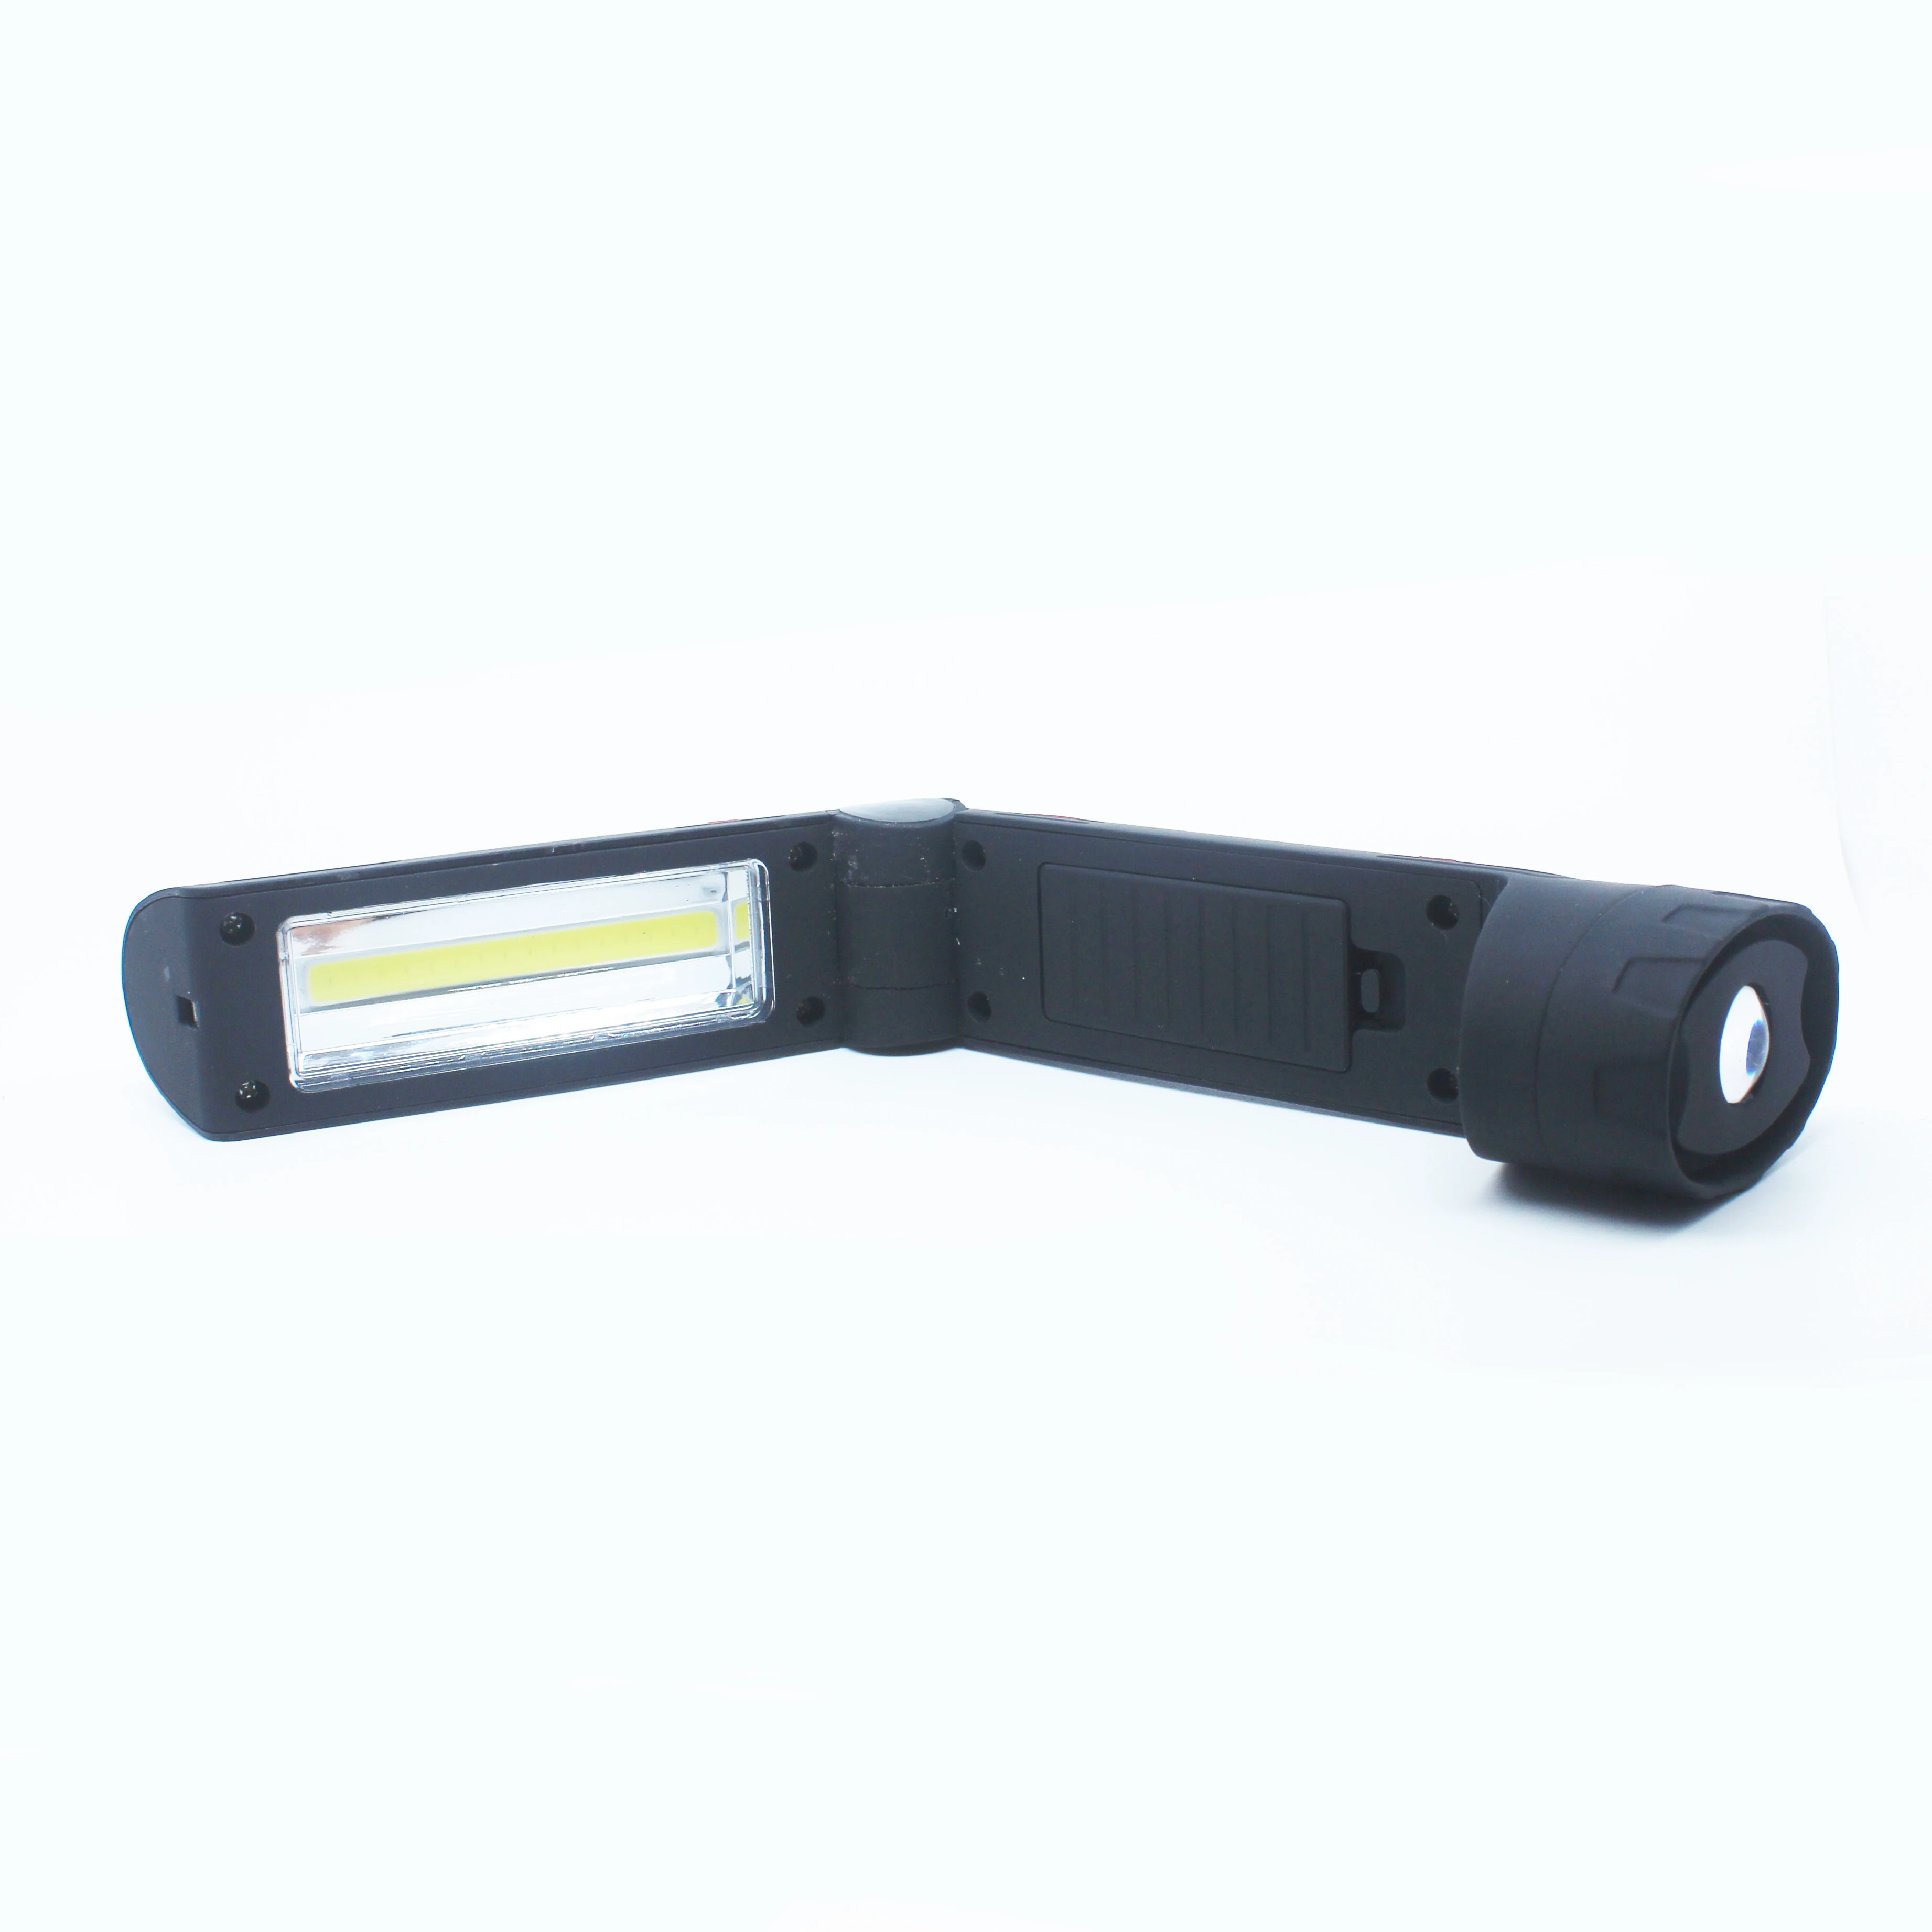 Foldable COB Work Light with hook and magnet